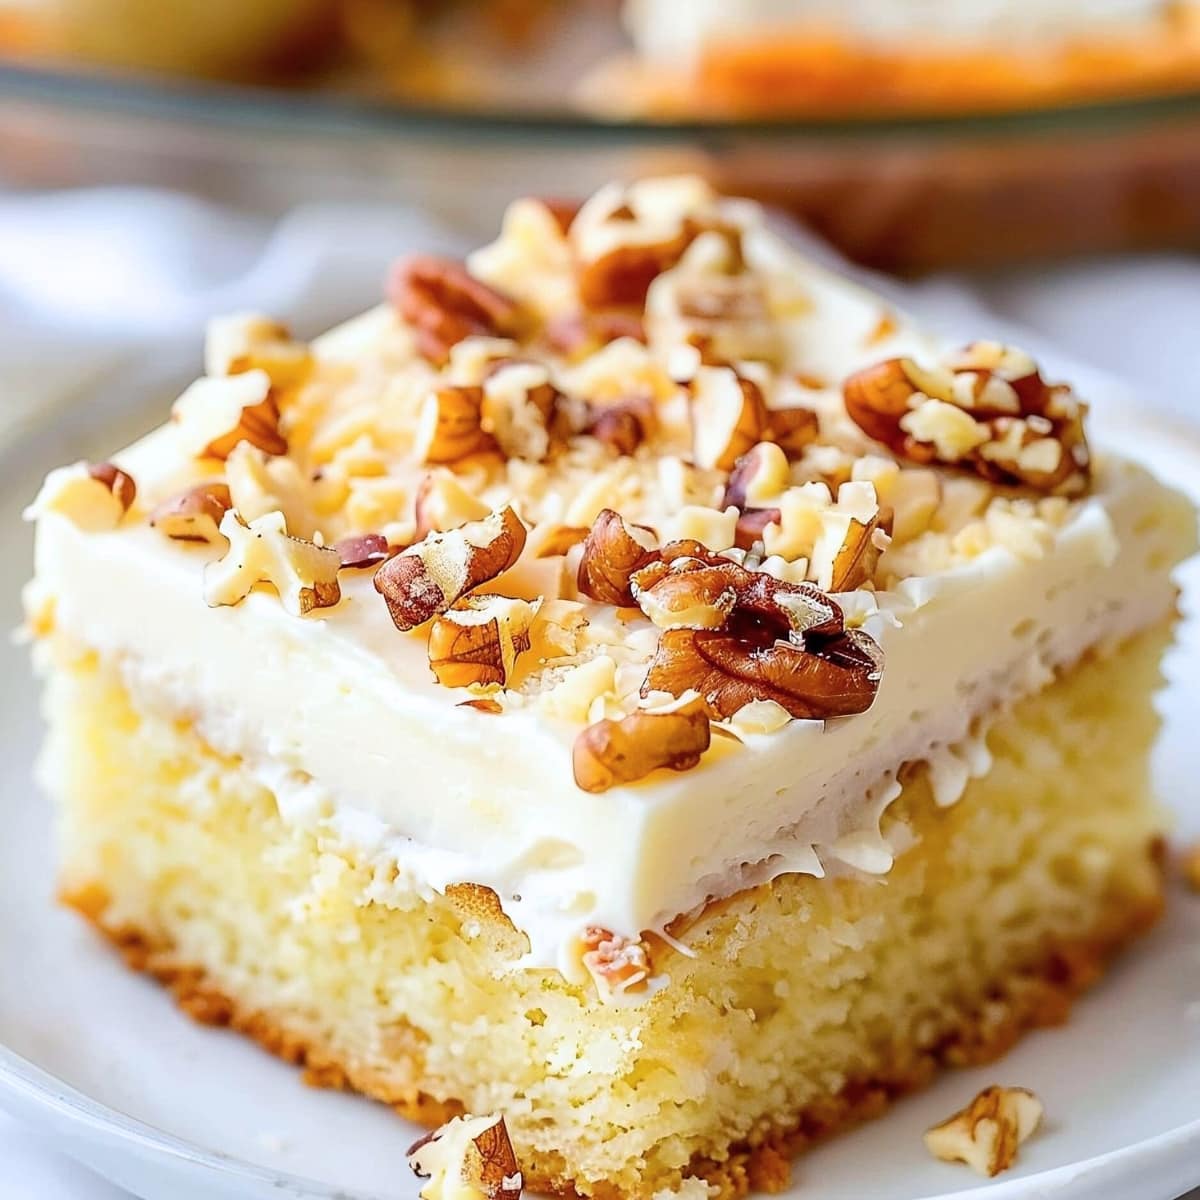 A slice of Elvis Presley yellow cake squares with cream cheese and pecan nuts